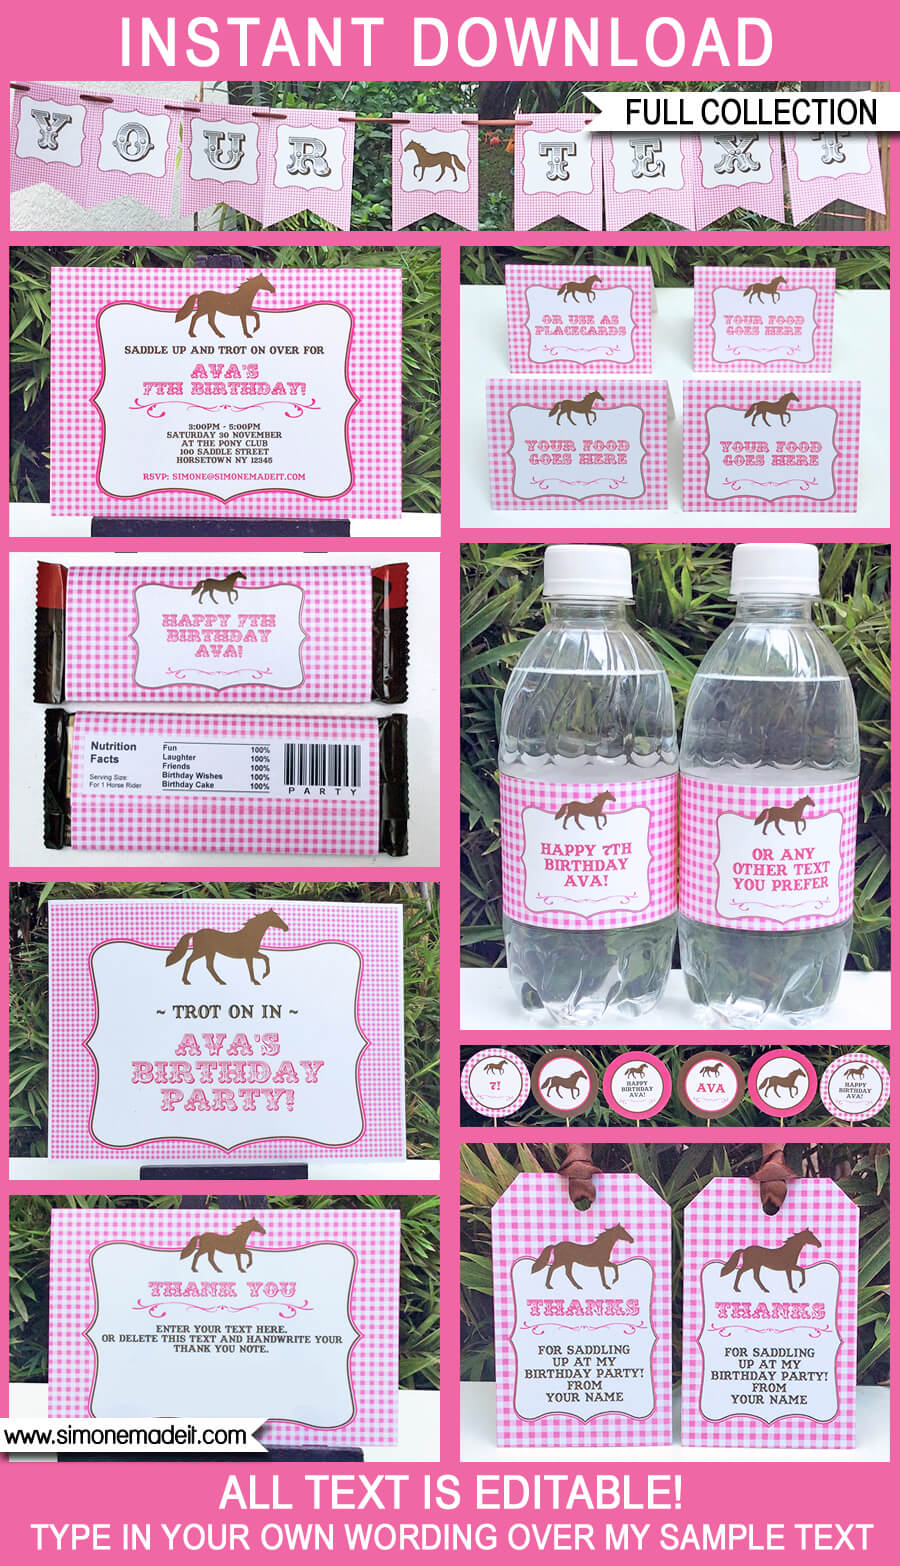 Horse Party Printables, Invitations & Decorations | Pony Party | Editable Birthday Party Templates | INSTANT DOWNLOAD $12.50 via SIMONEmadeit.com